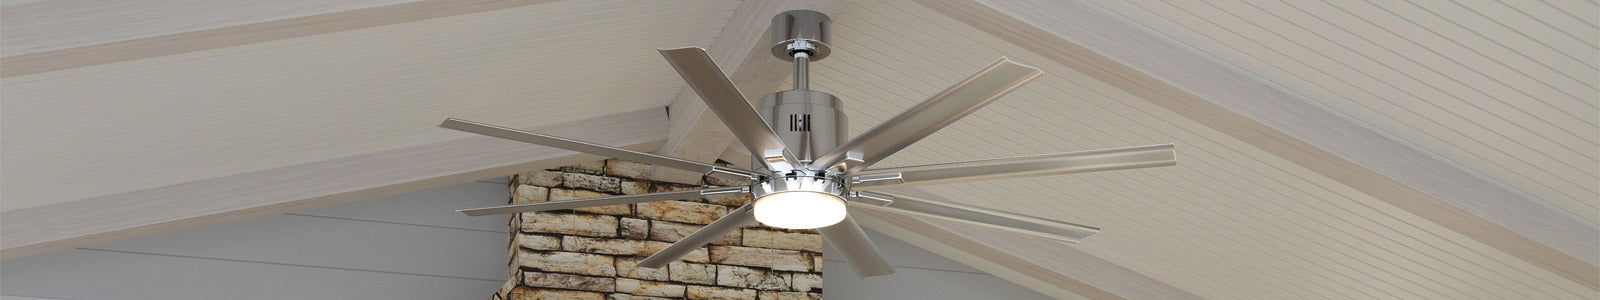 Outdoor Ceiling Fans - Urban Ambiance